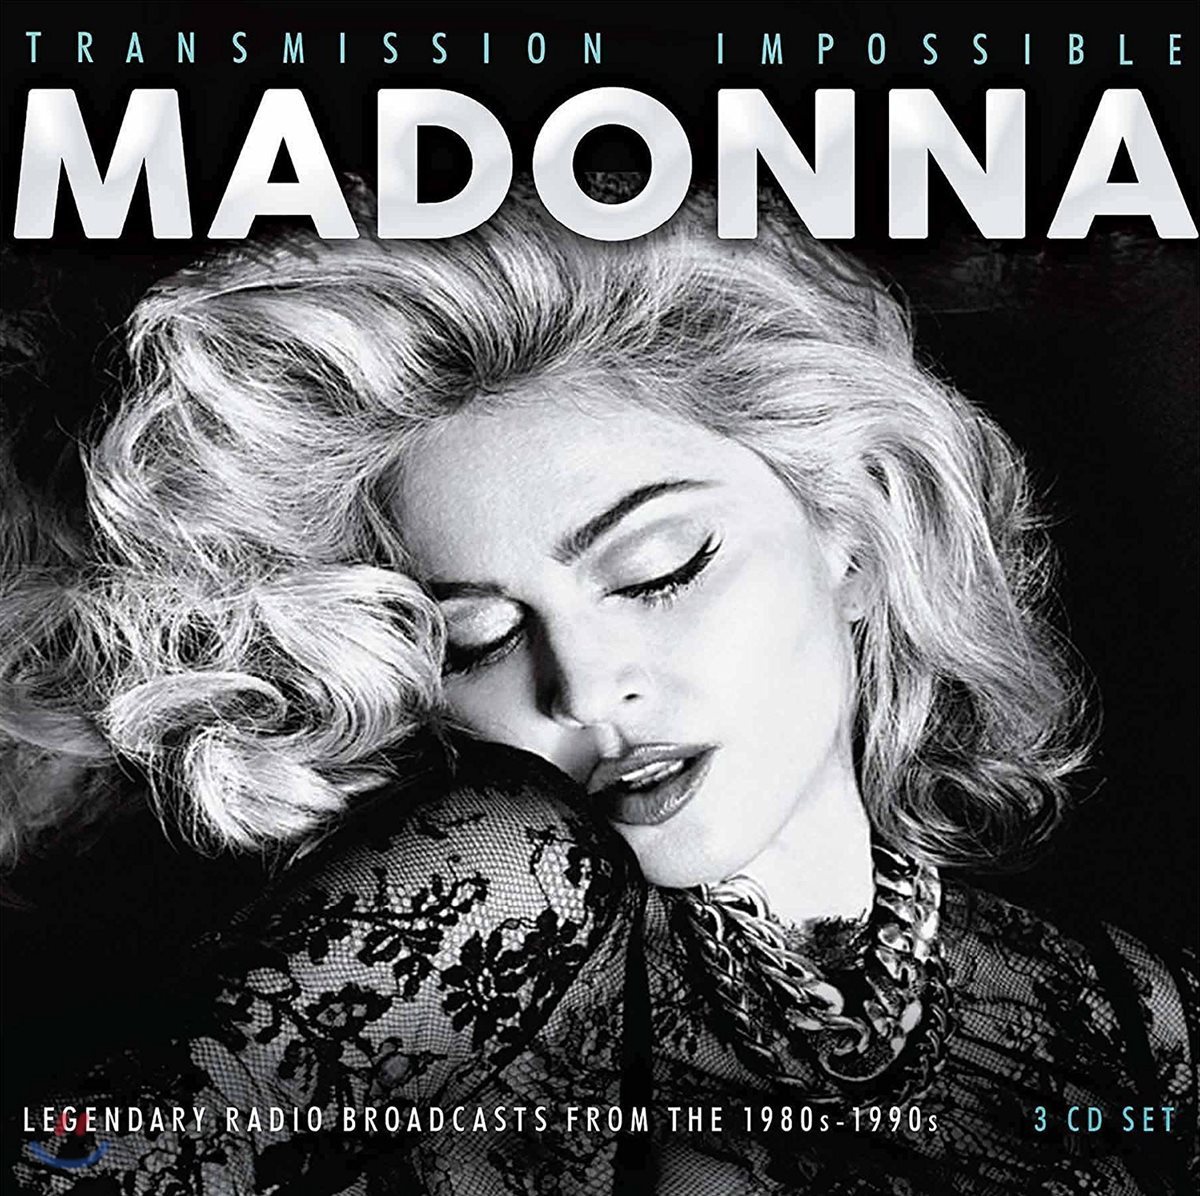 Madonna (마돈나) - Transmission Impossible: Legendary Radio Broadcasts from the 1980s-1990s